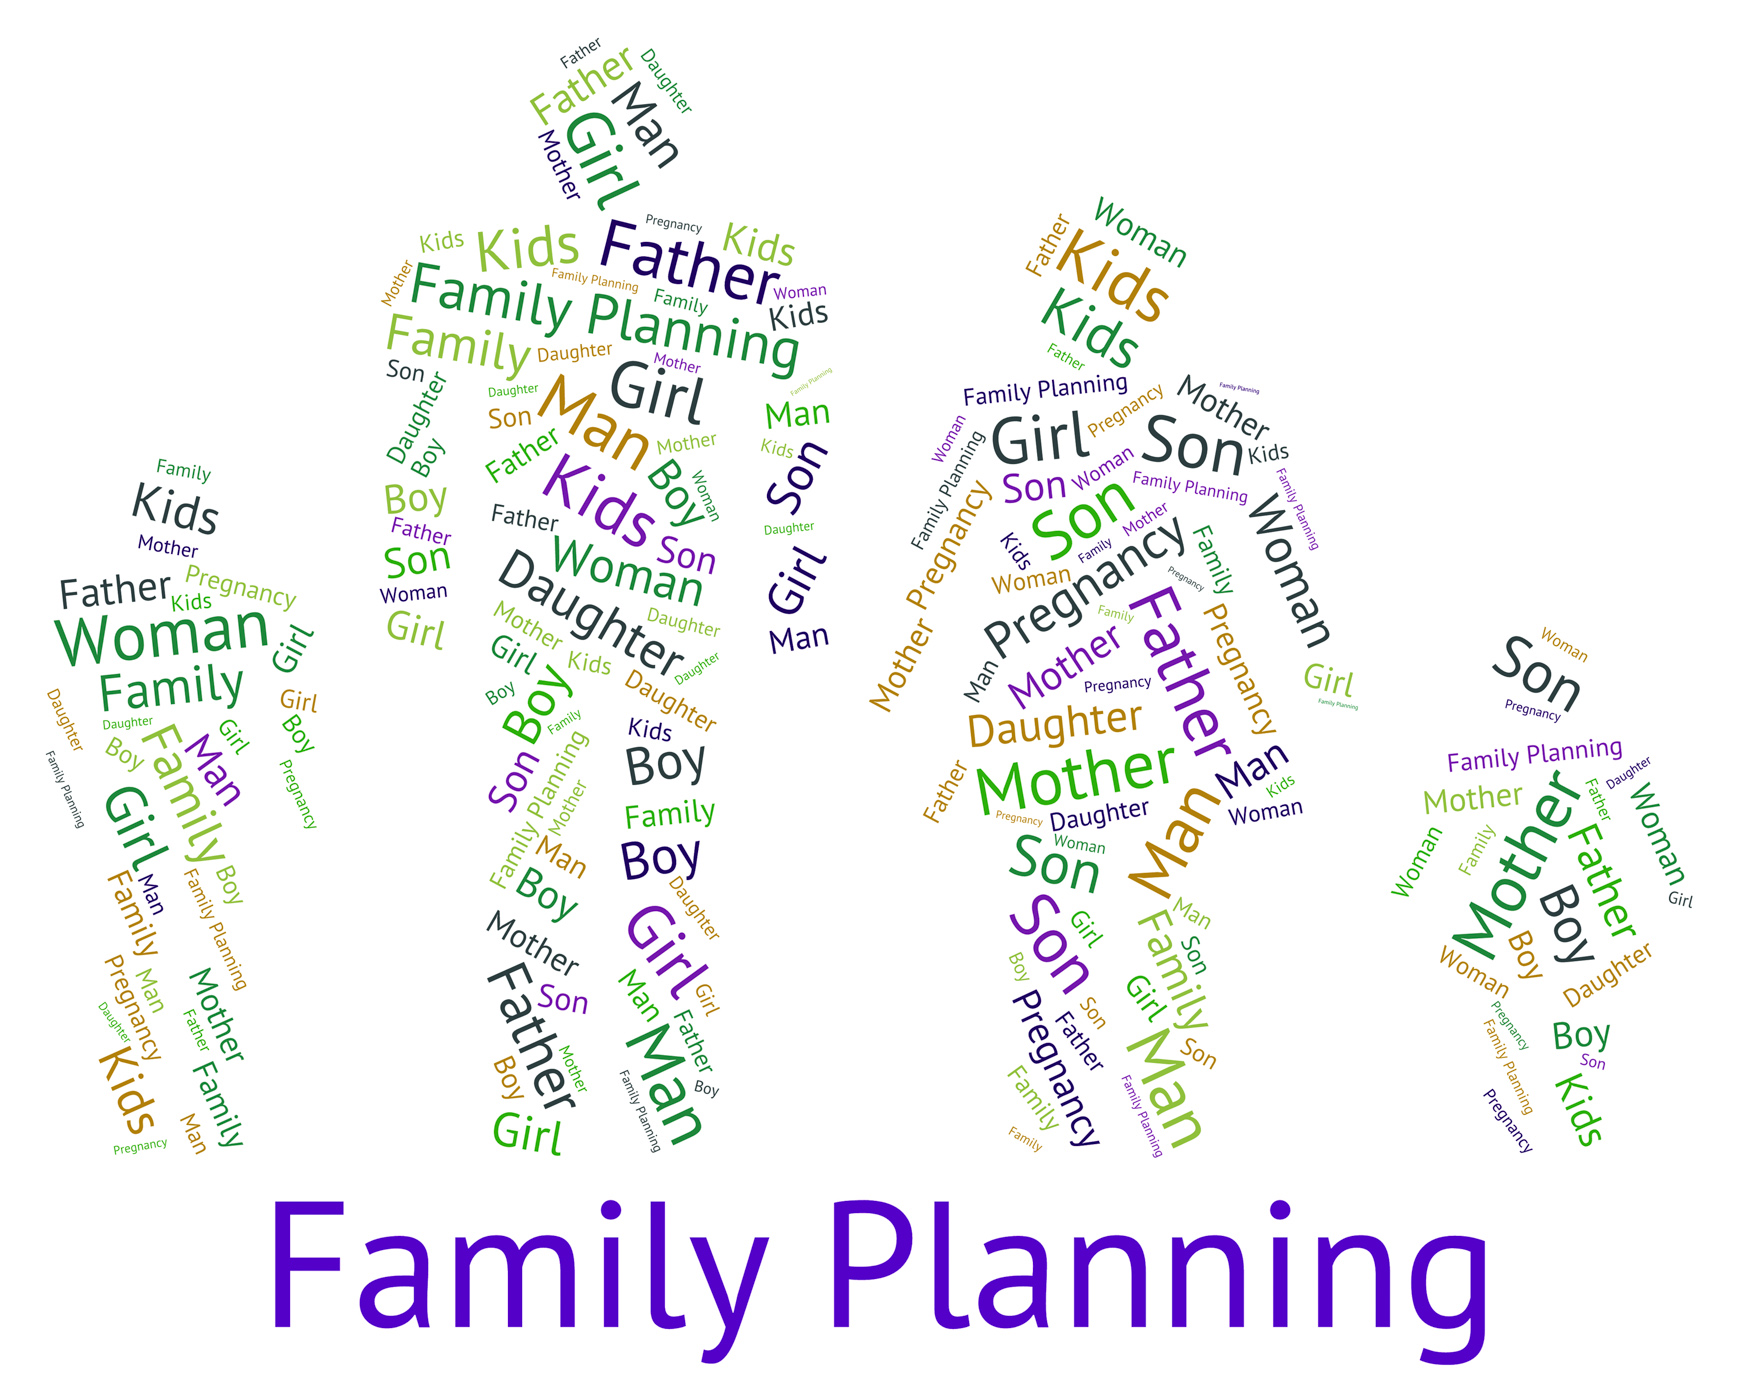 Family planning represents blood relation and children photo